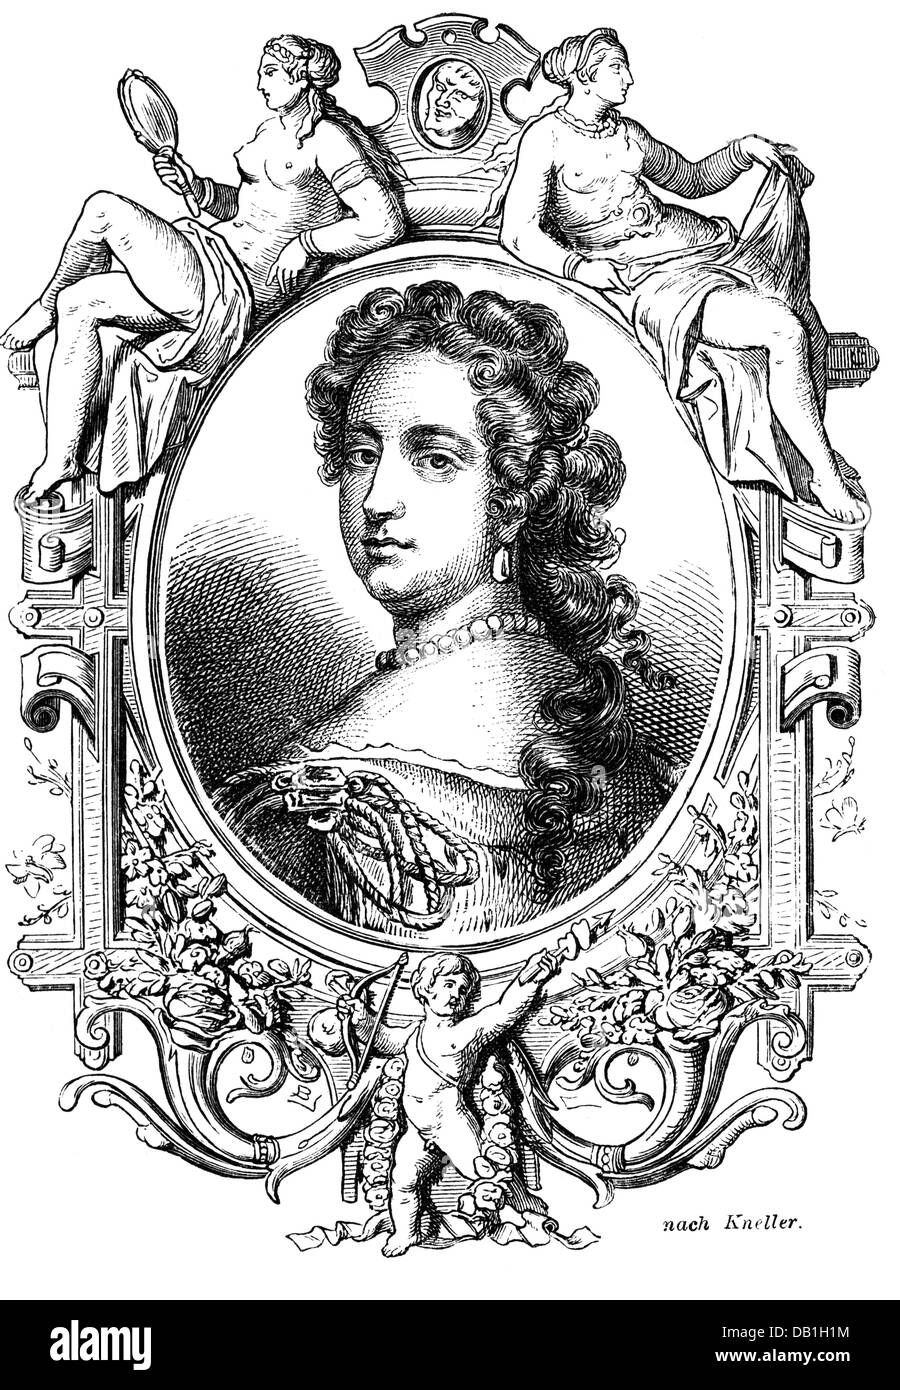 Palmer, Barbara, 22.5.1641 - 9.10.1709, 1st Duchess of Cleveland, English lady-in-waiting, portrait, wood engraving, 19th century, Stock Photo